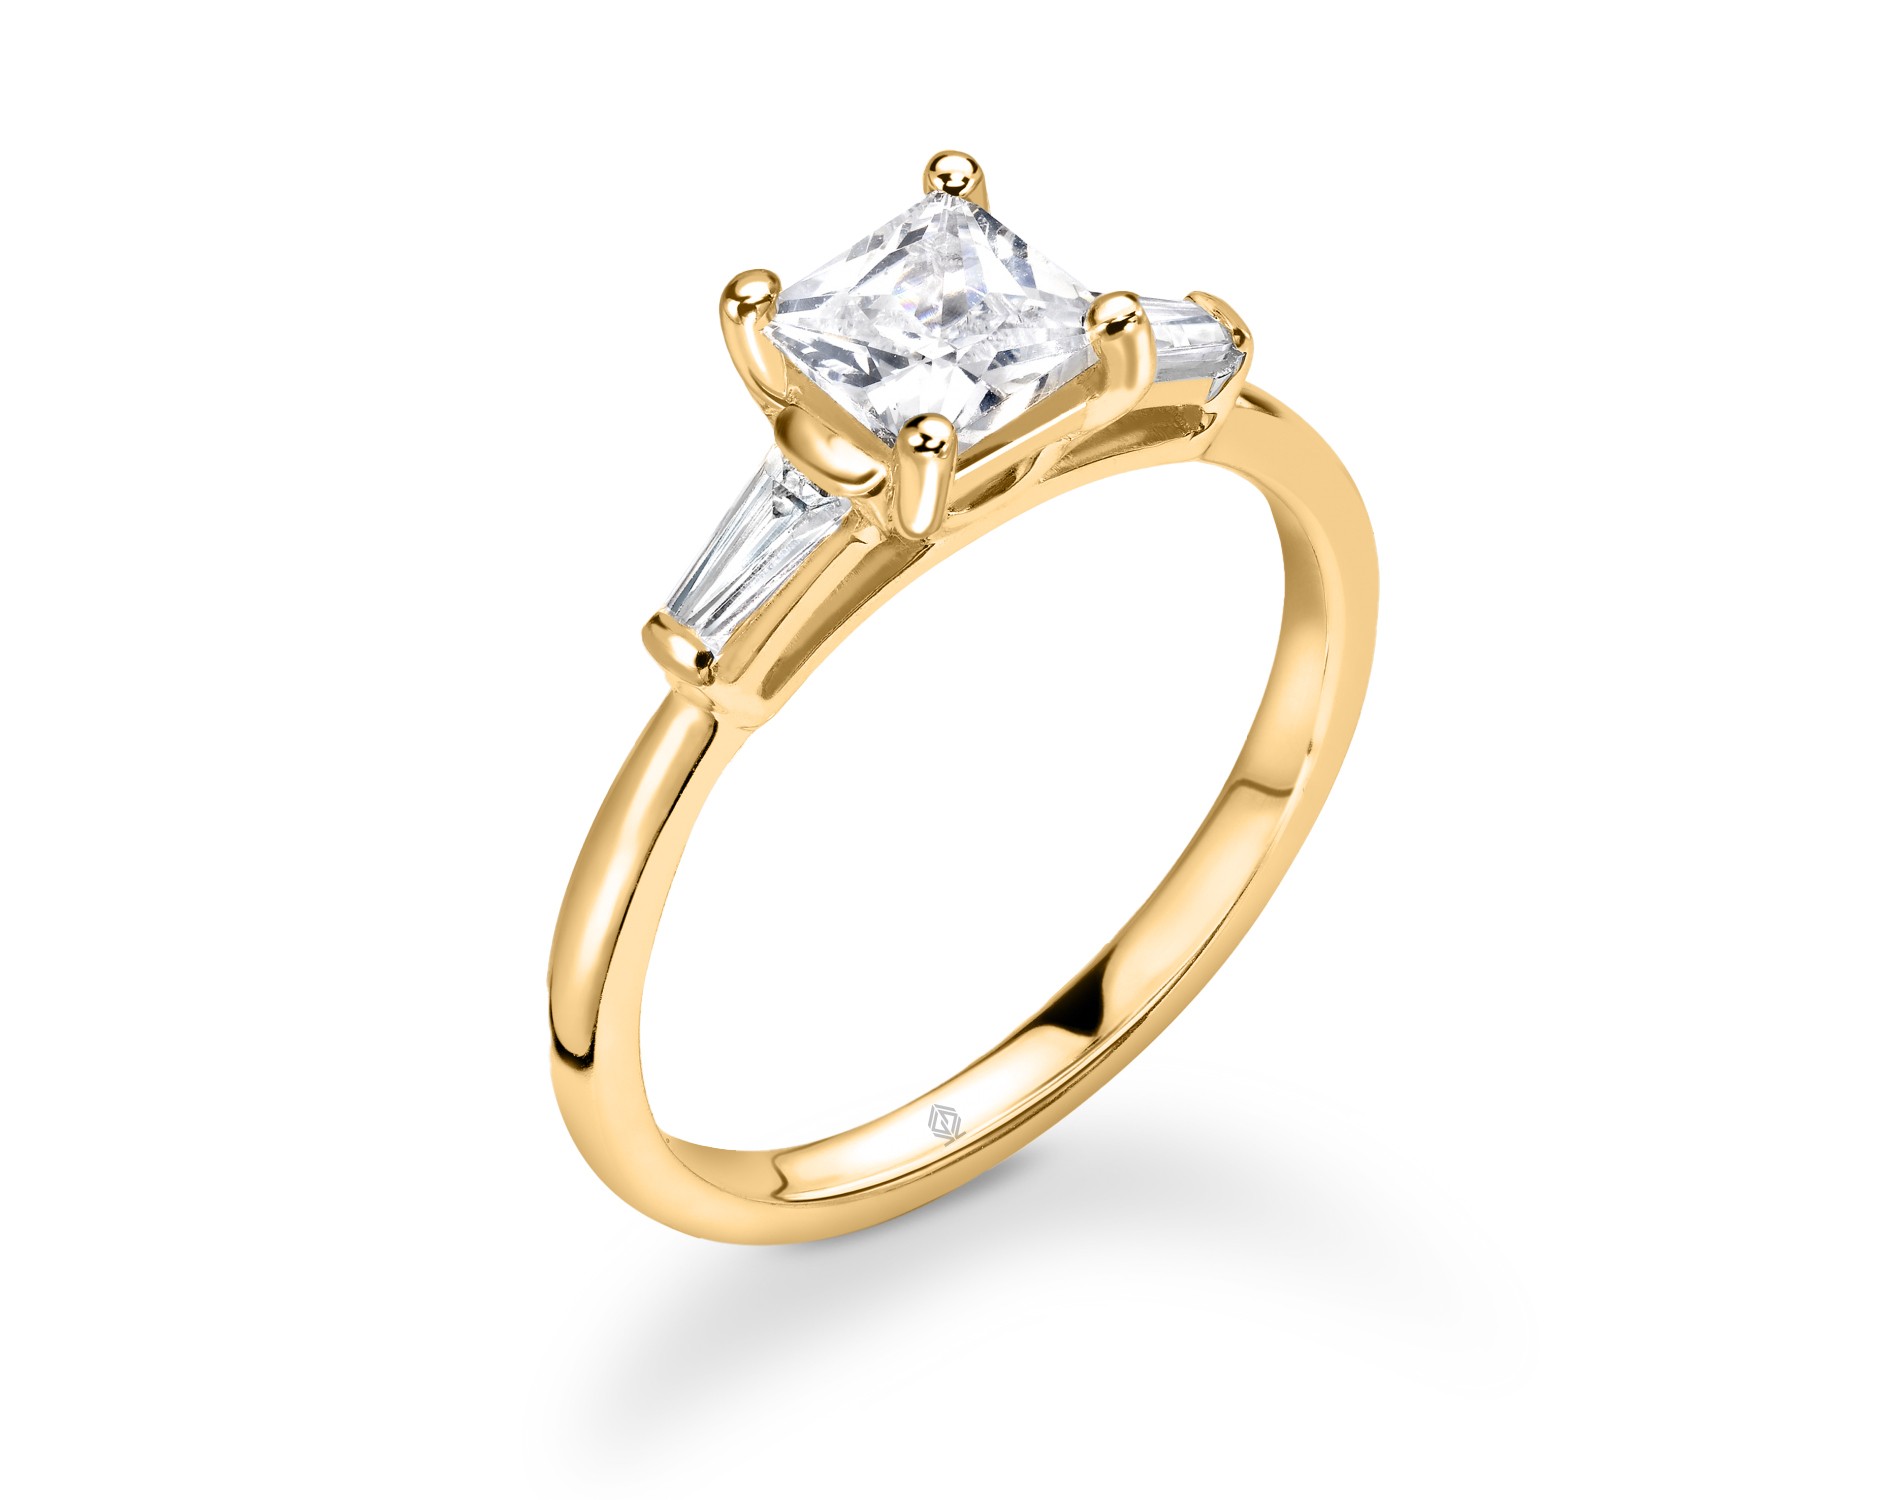 18K YELLOW GOLD PRINCESS CUT 4 PRONGS DIAMOND ENGAGEMENT RING WITH BAGUETTES CUT SIDE STONES